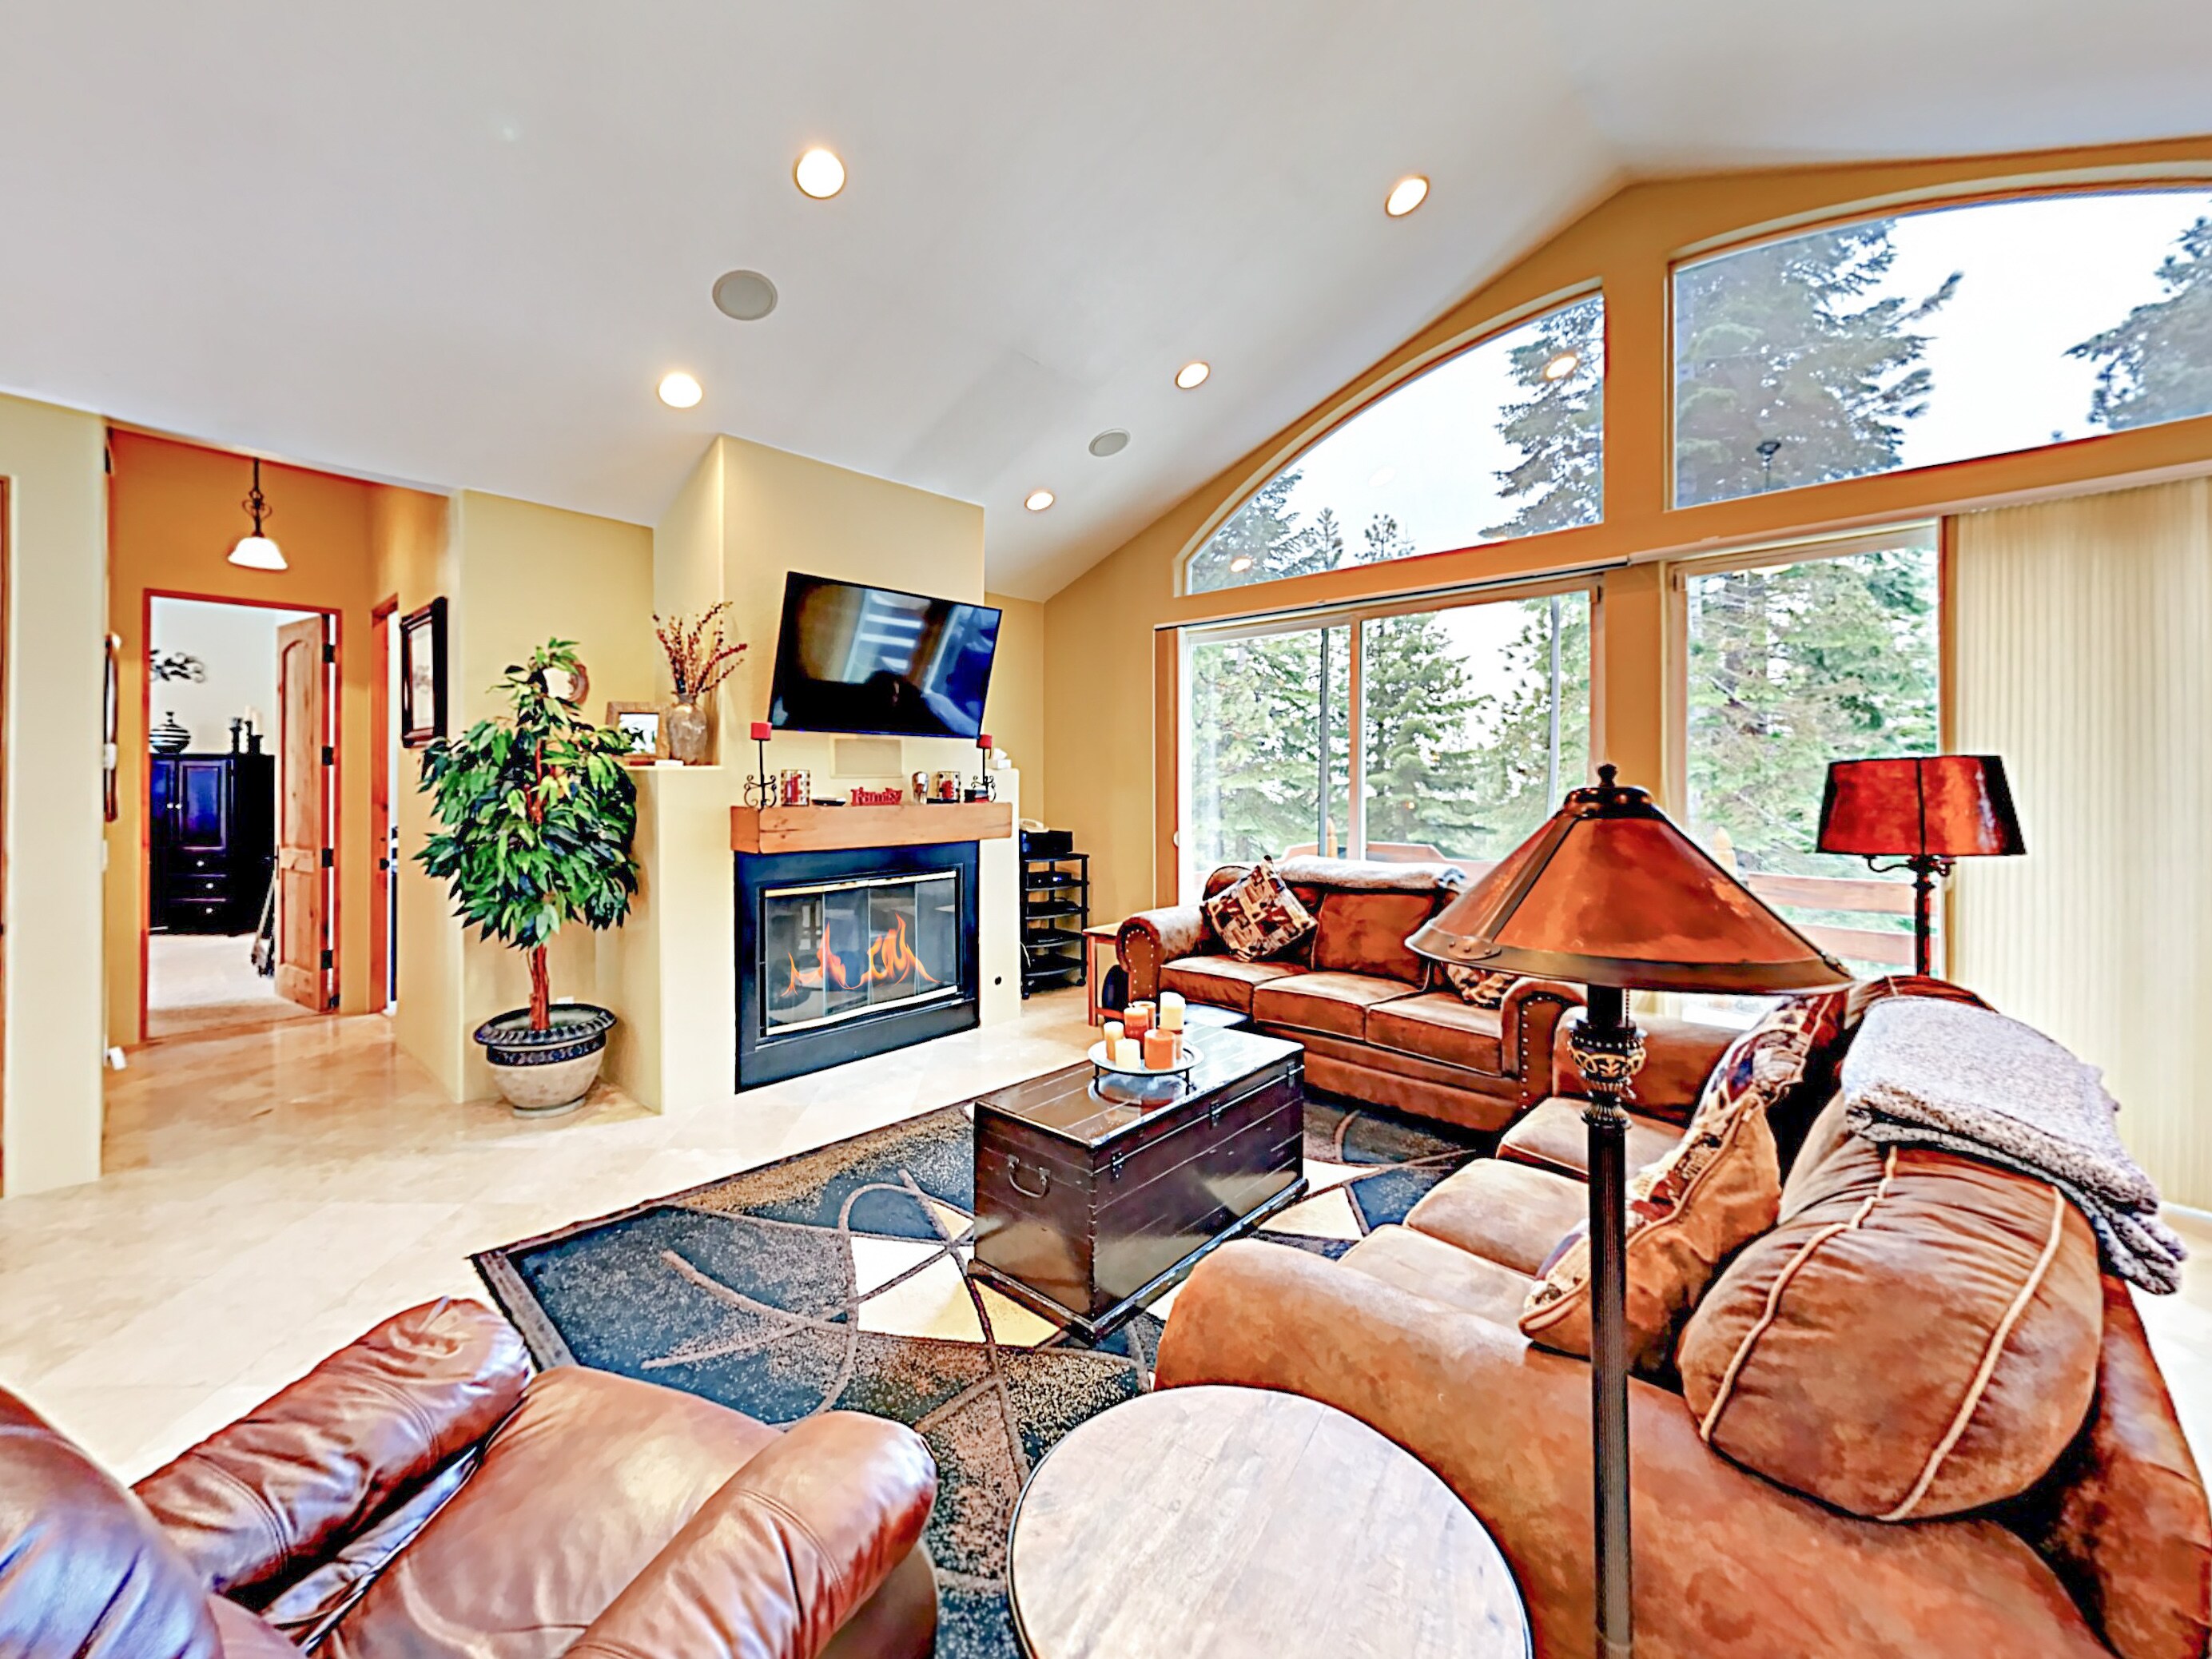 Welcome to South Lake Tahoe! This home is professionally managed by TurnKey Vacation Rentals.